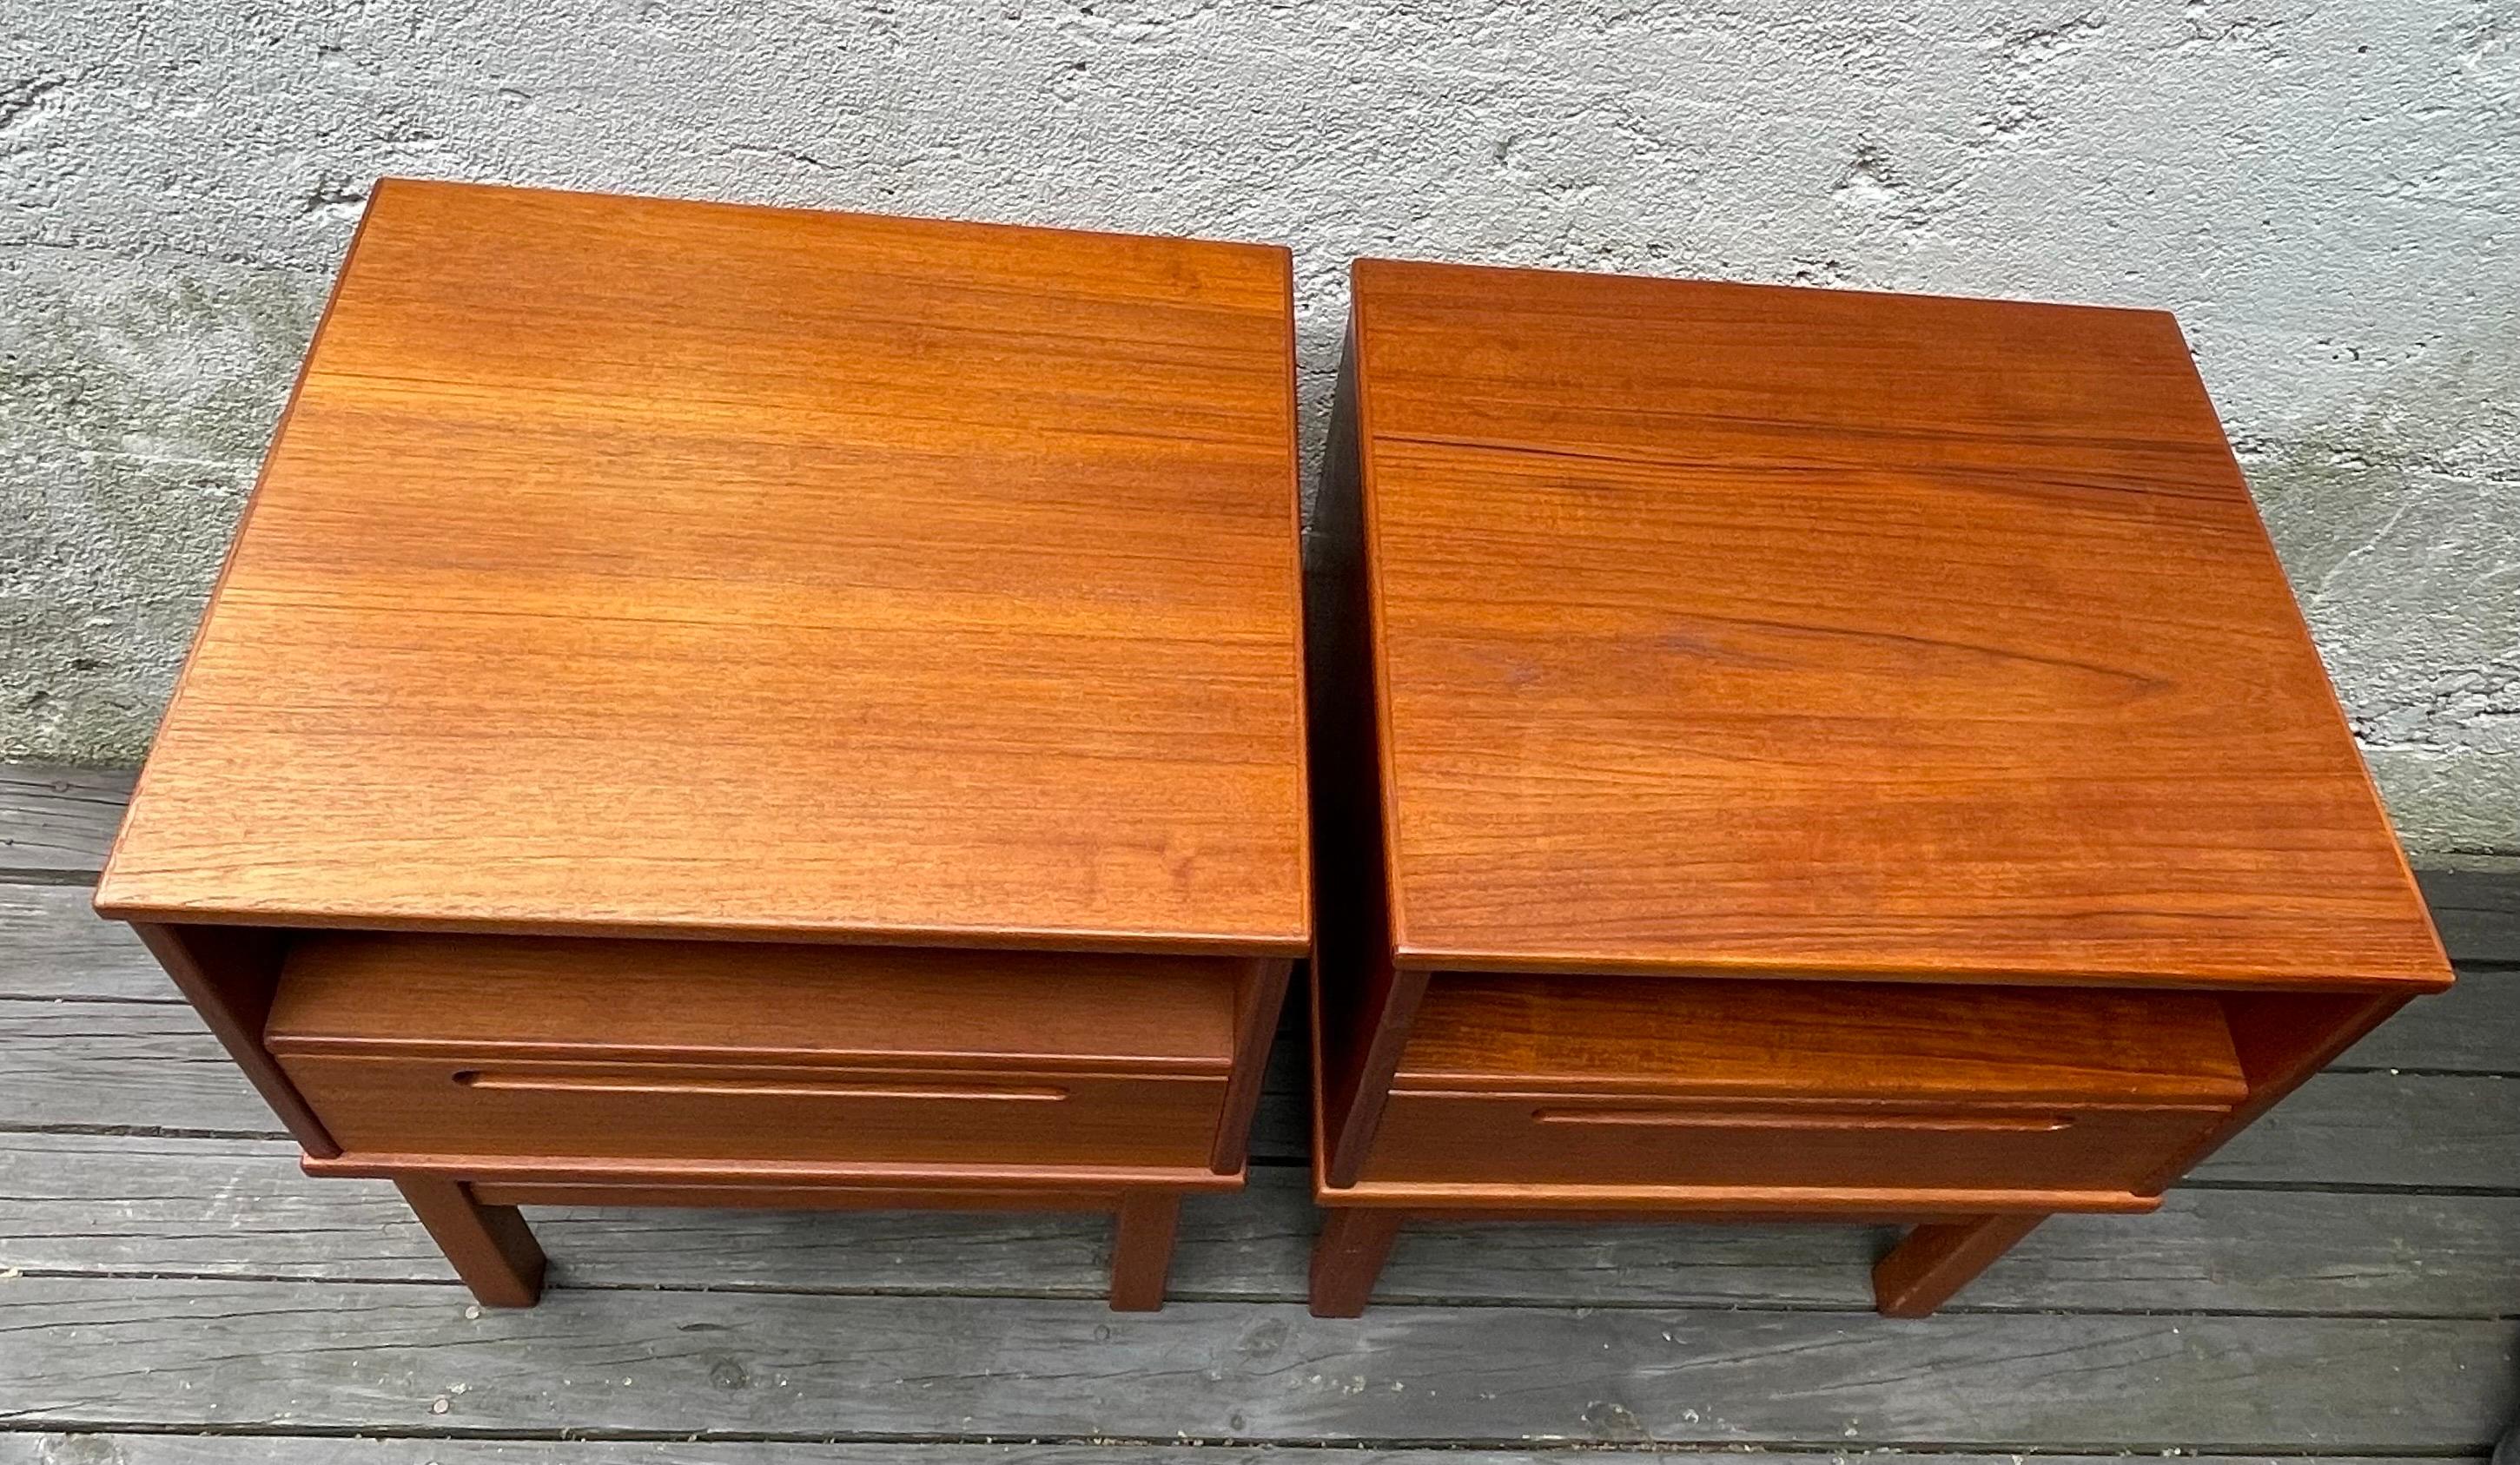 Pair of Mid-Century Modern Teak Nightstands or Side Tables, Denmark In Good Condition For Sale In Bedford Hills, NY